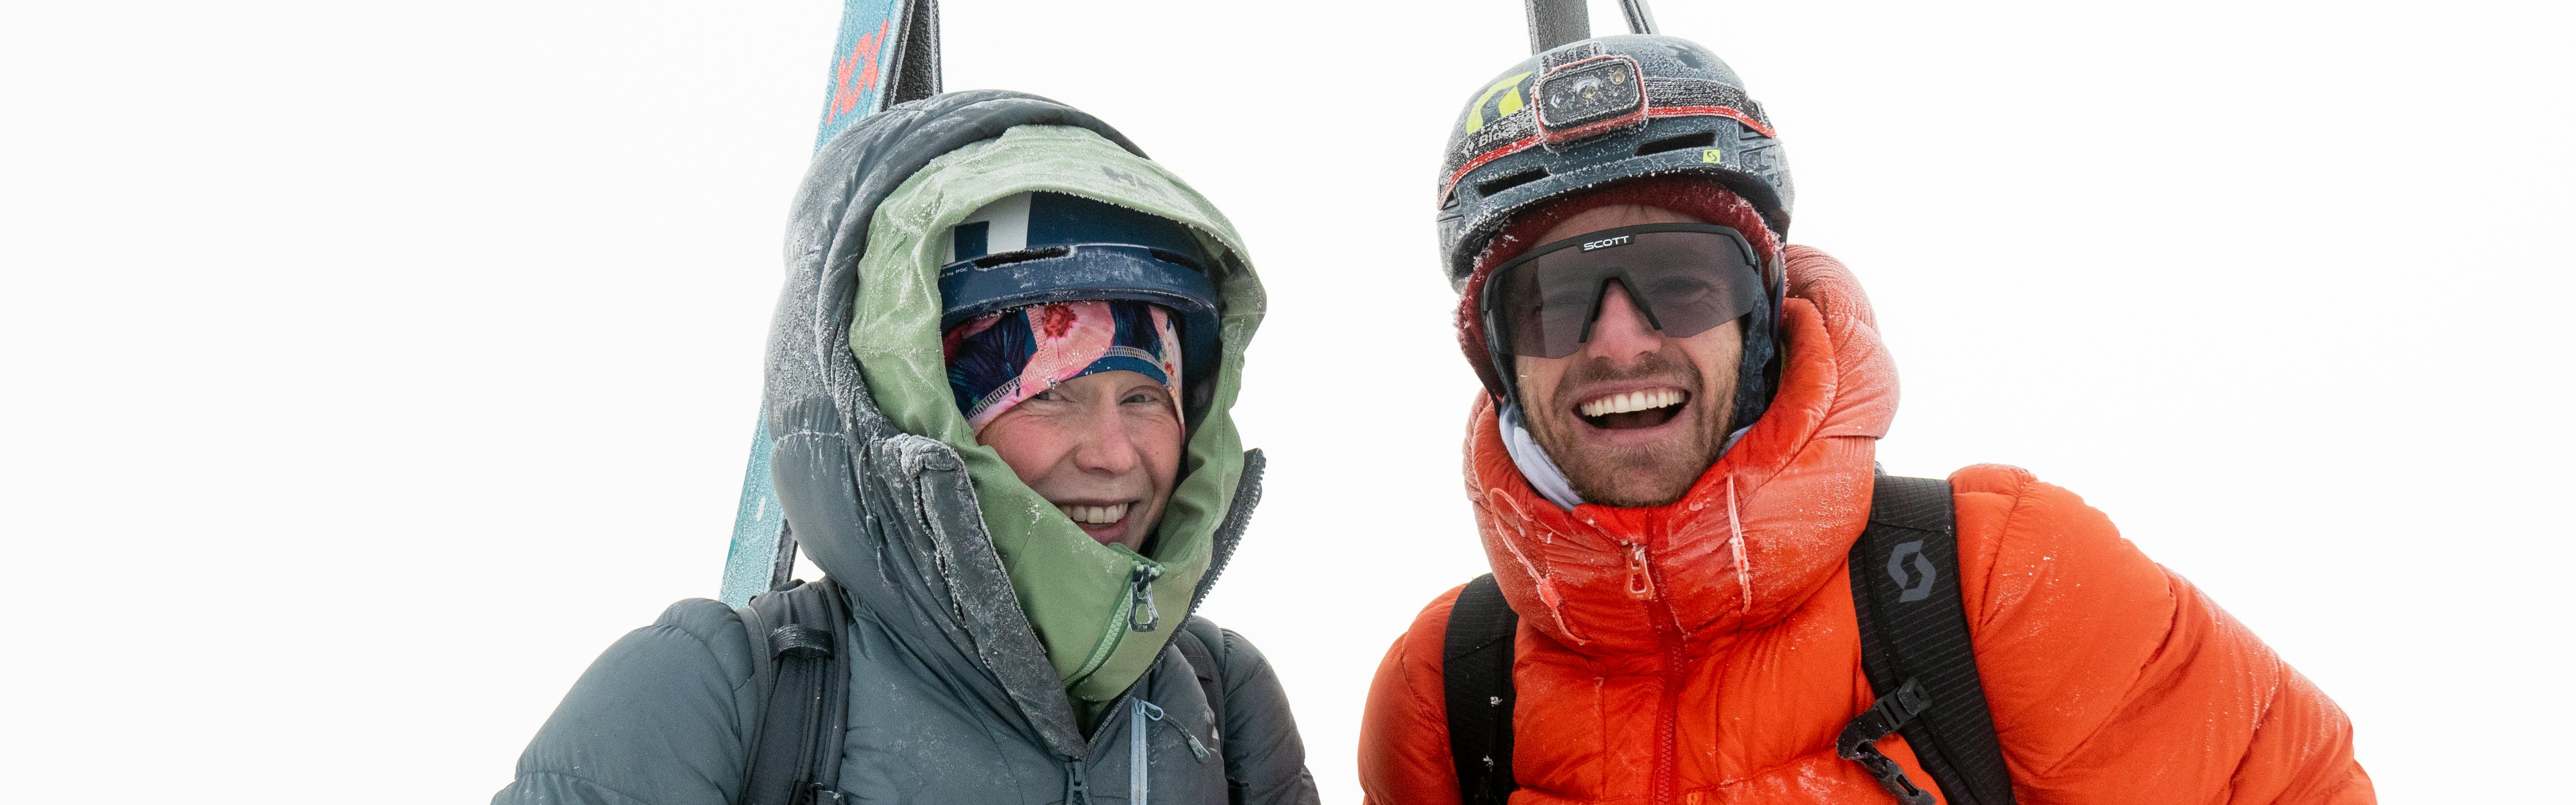 Chatting with the Pros: Madison Ostergren and Jim Ryan Discuss Life as a Pro Skiers, Völkl Skis, Waffles, and Whimsy